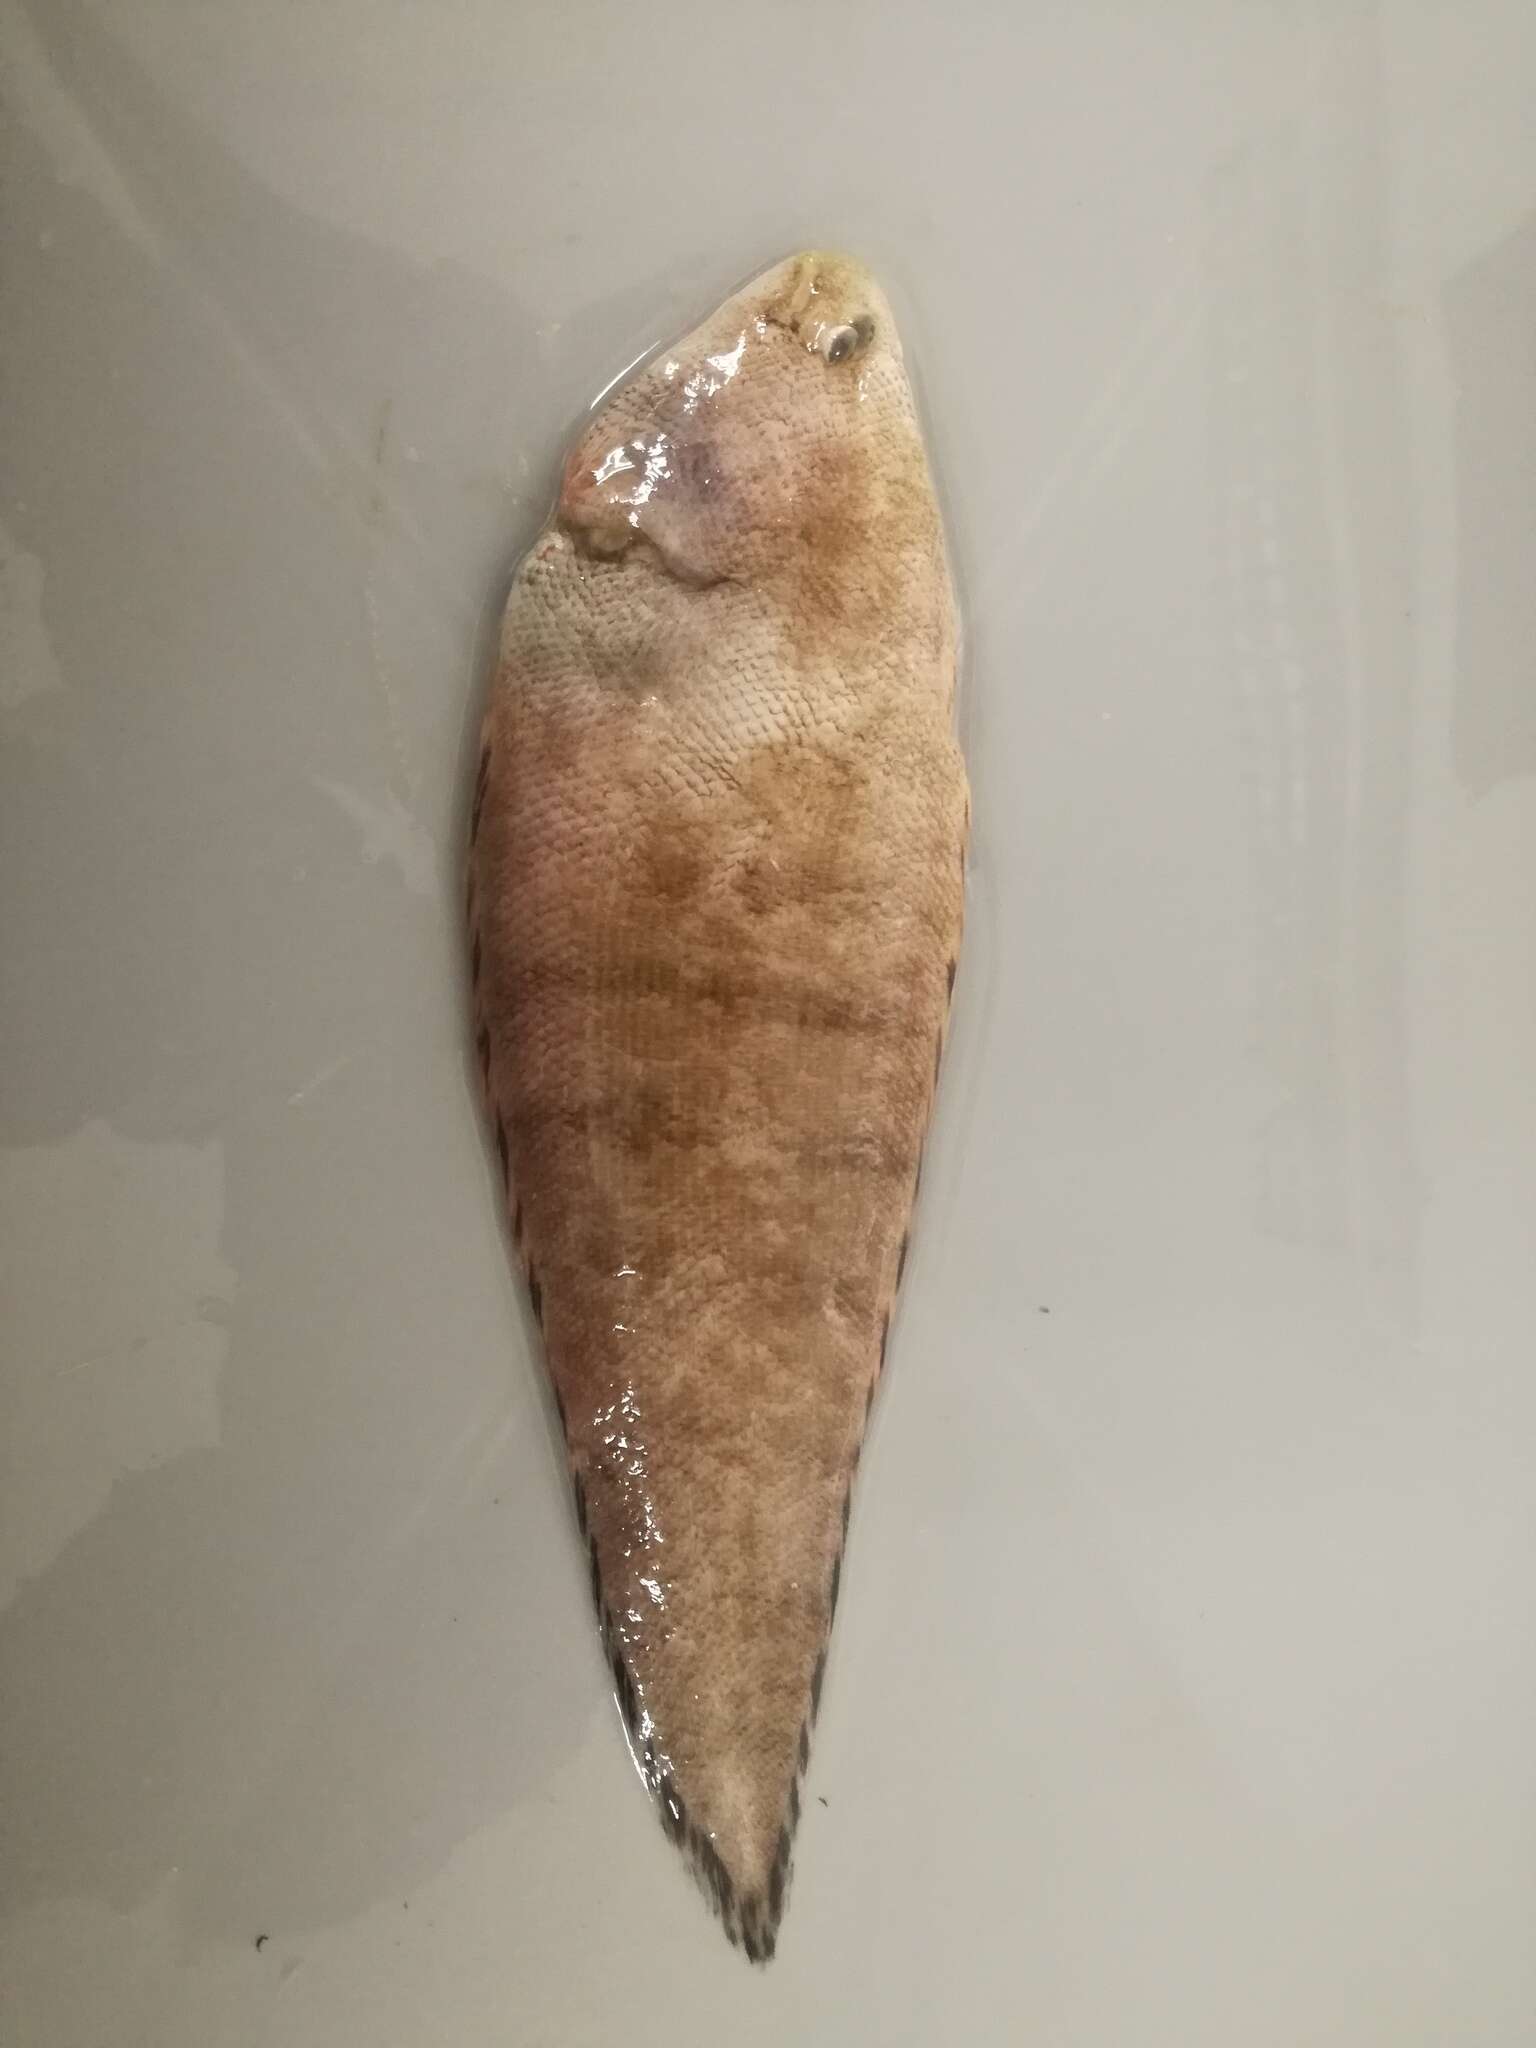 Image of Halfspotted tonguefish